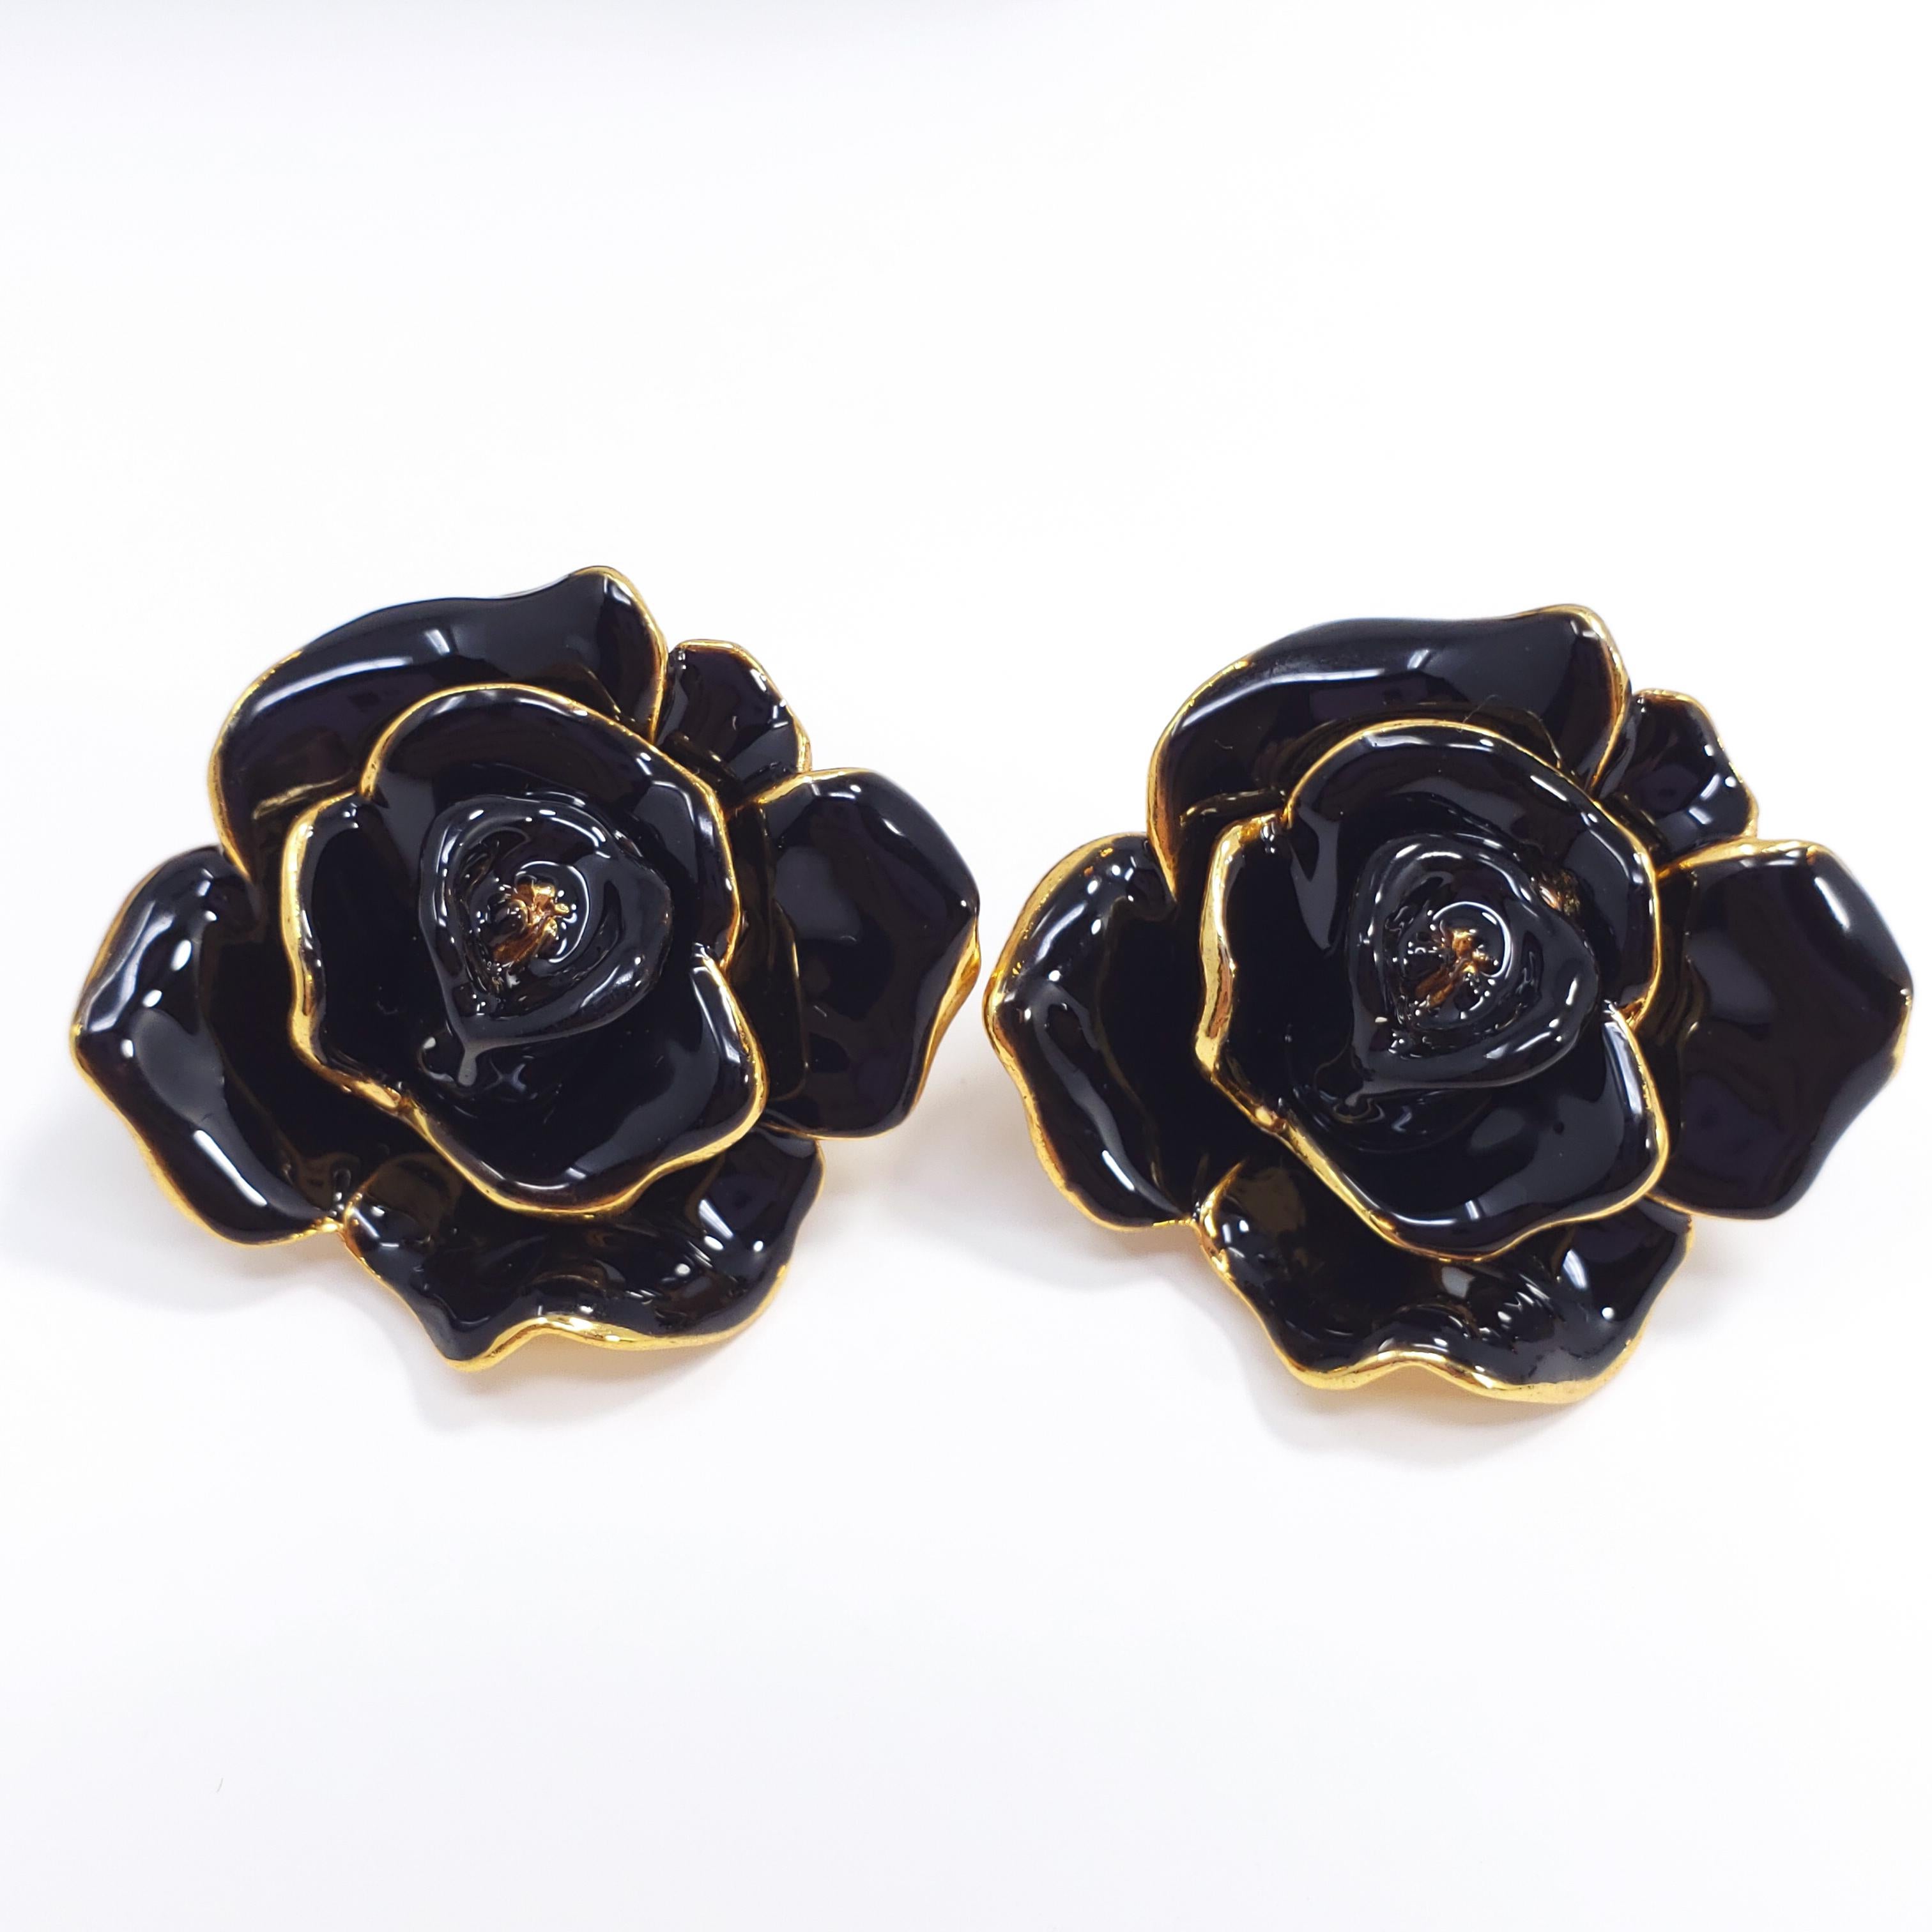 A pair of painted black enamel rosette floral clip-on earrings by Oscar de la Renta. Bold and stylish earrings to compliment any outfit!

Hallmarks: Oscar de la Renta, Made in USA